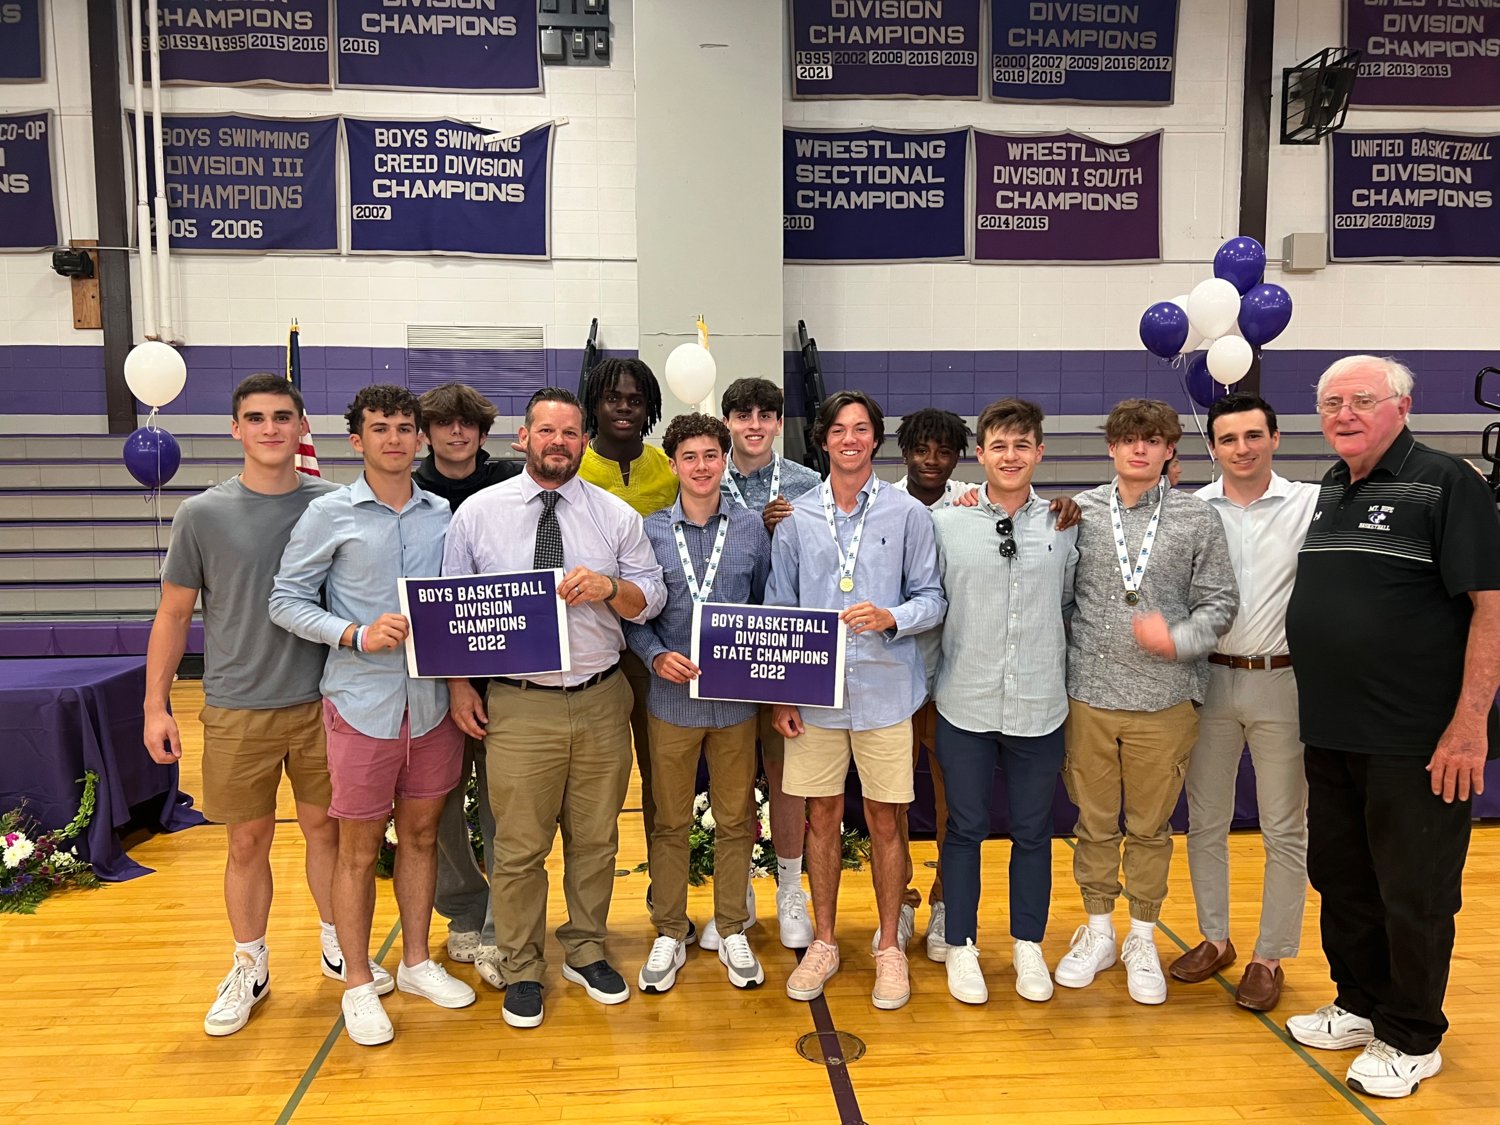 The Mt. Hope Boys Basketball team was recognized for their Division III championship season.